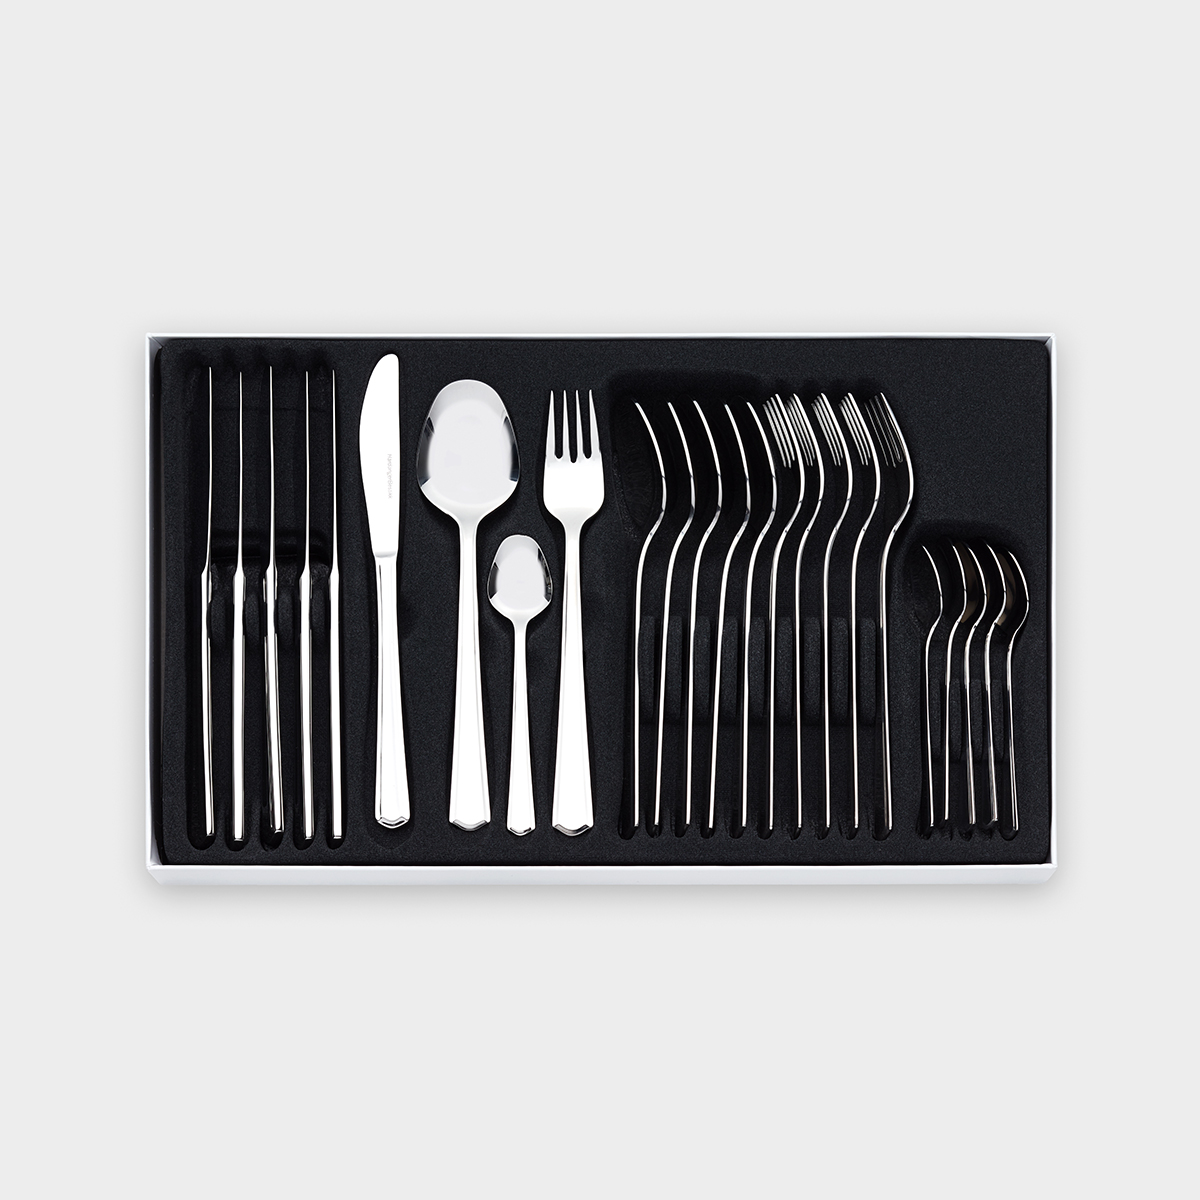 Mira cutlery set 24 pieces product image